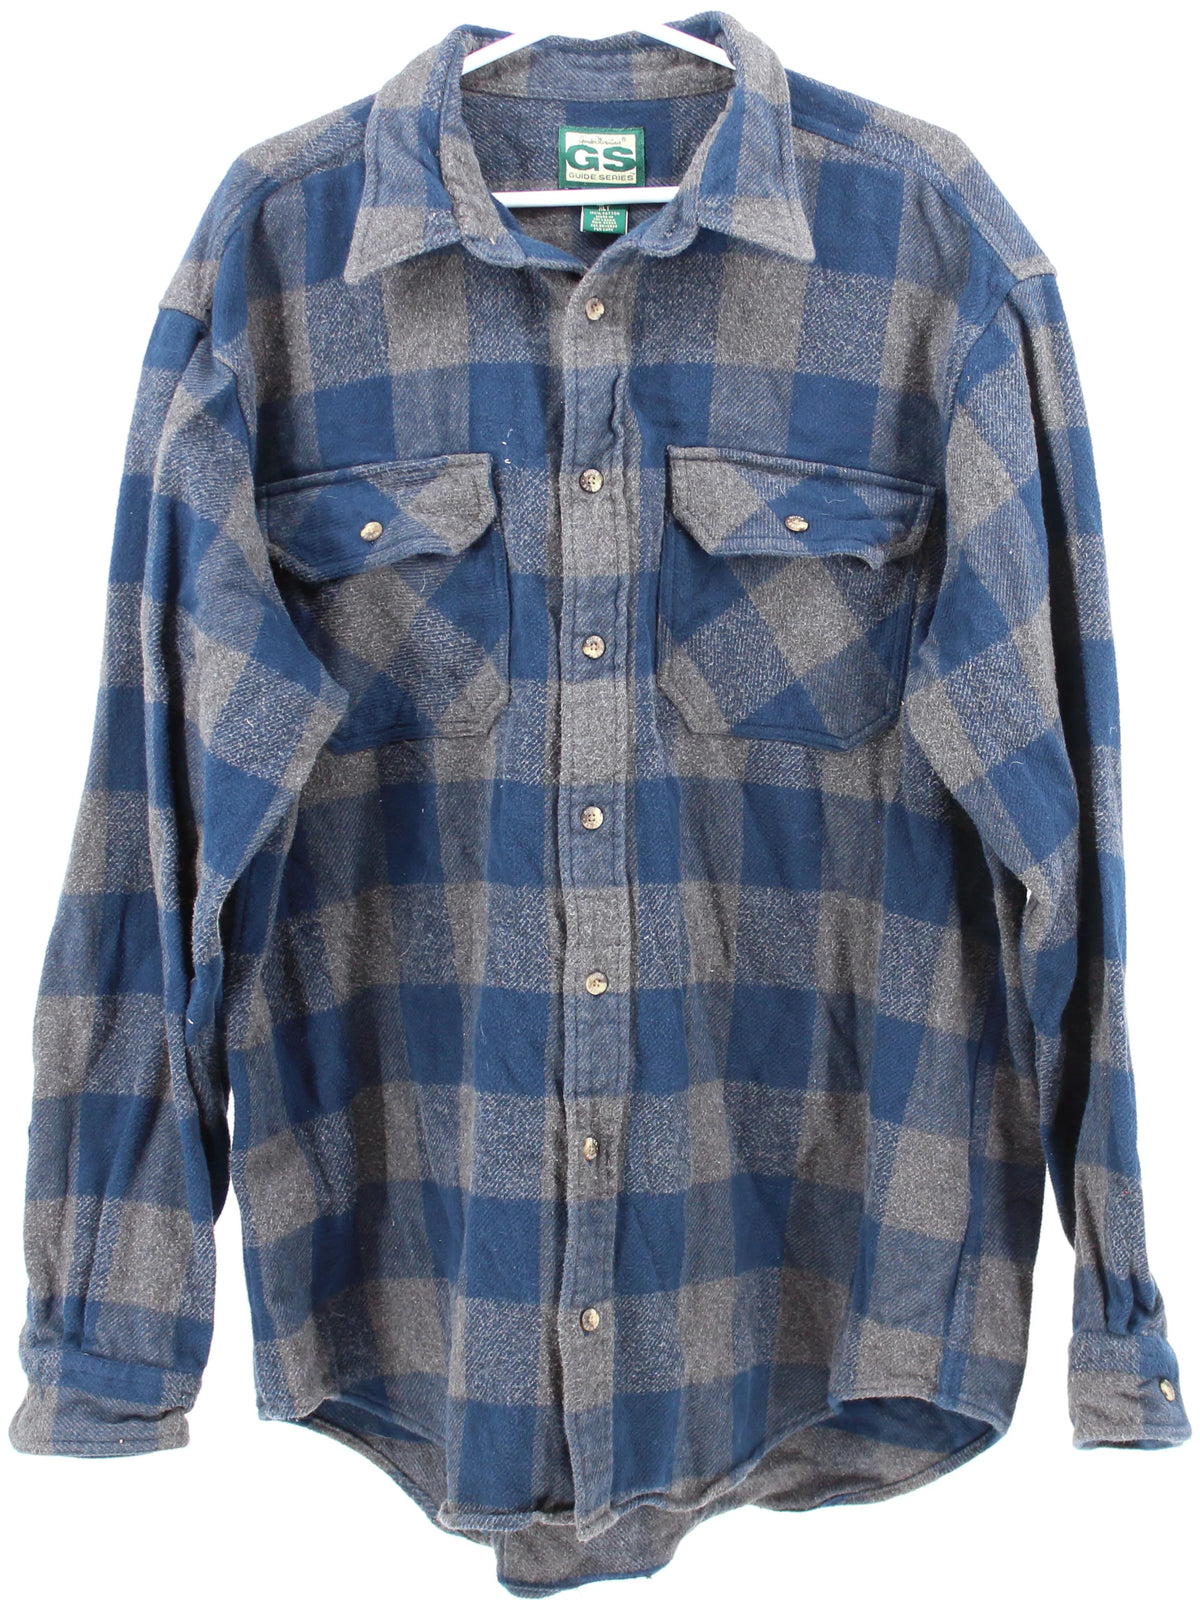 GS Guide Series Blue and Grey Plaid Flannel Shirt